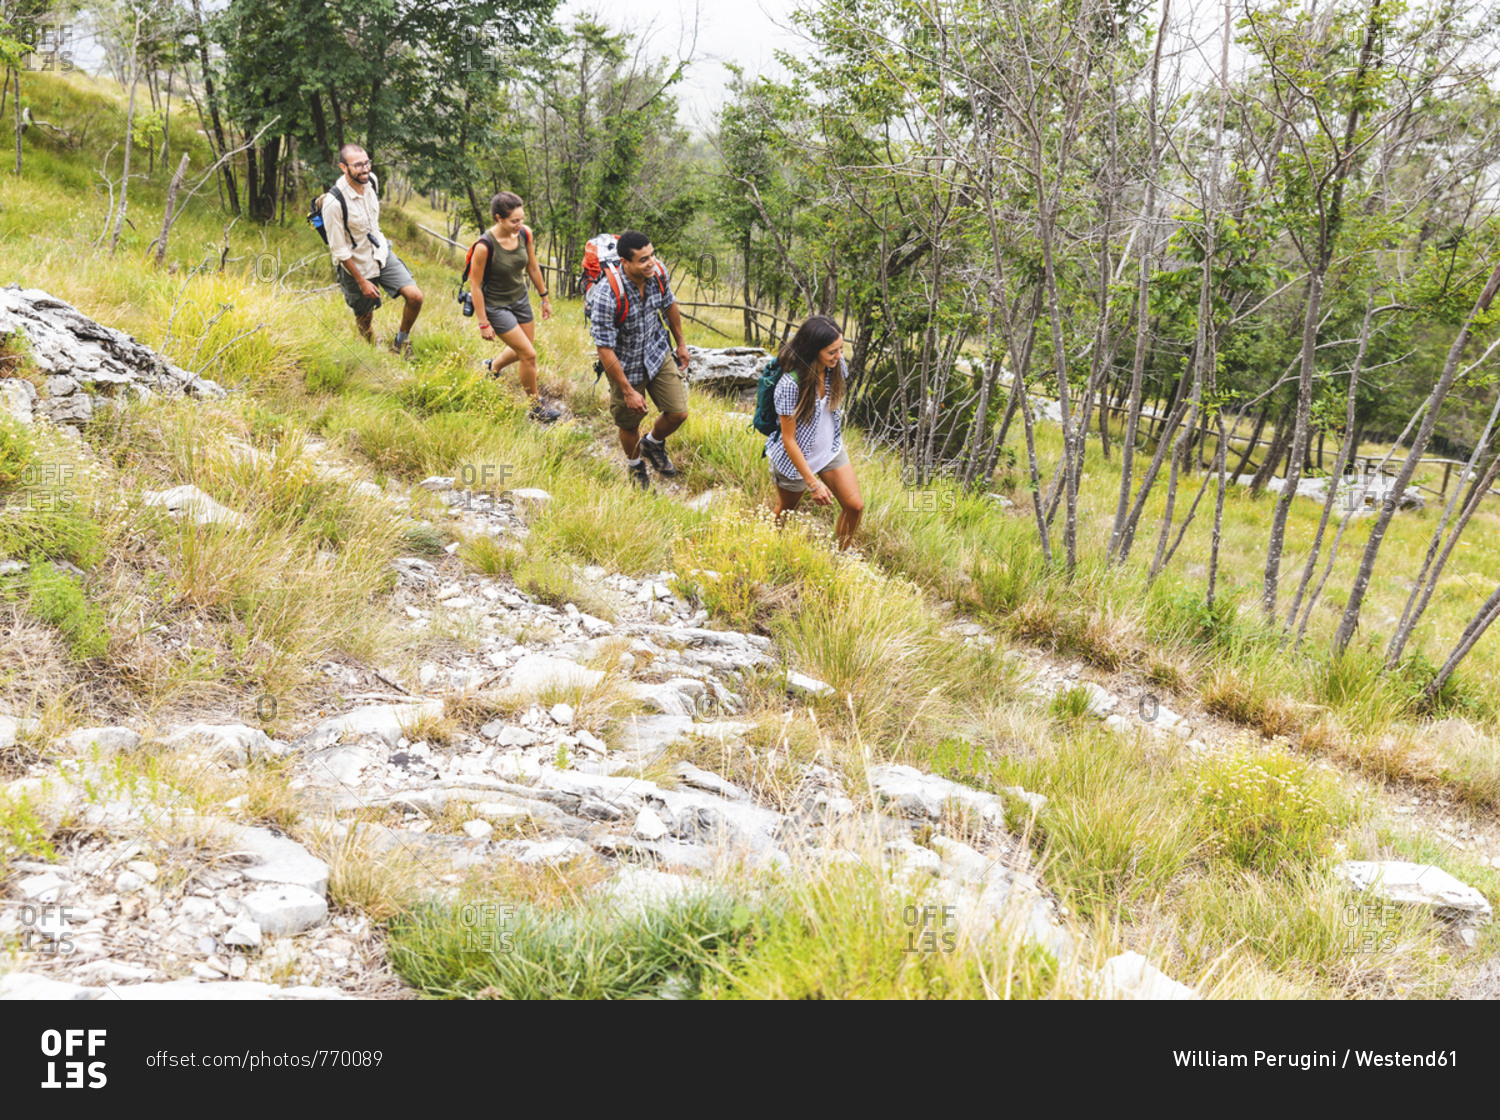 Italy- Massa- group of young people hiking in the Alpi Apuane mountains